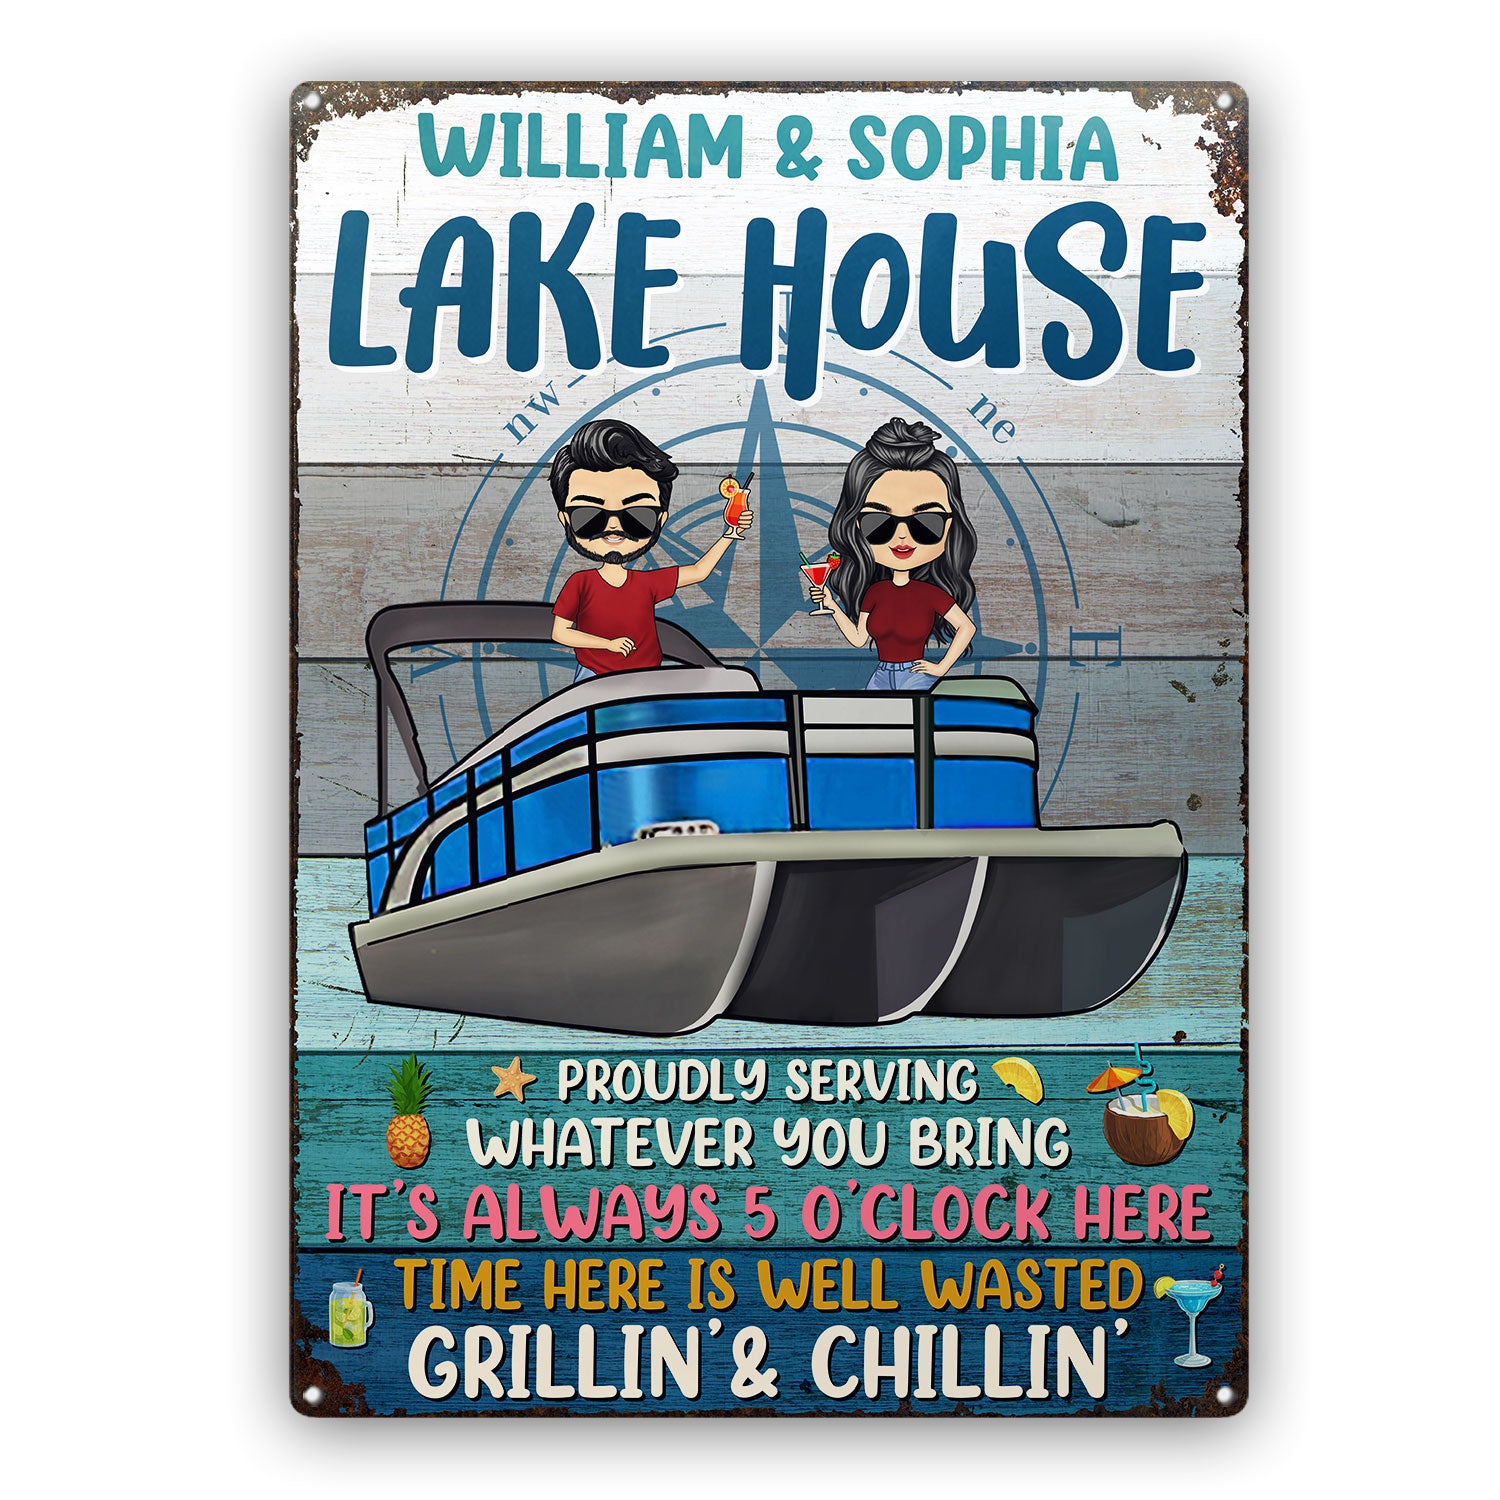 Welcome To Our Lake House Proudly Serving Whatever You Bring - Oudoor Home Decor, Lake House Sign, Gift For Pontooning Lovers, Couples, Husband, Wife - Personalized Custom Classic Metal Signs